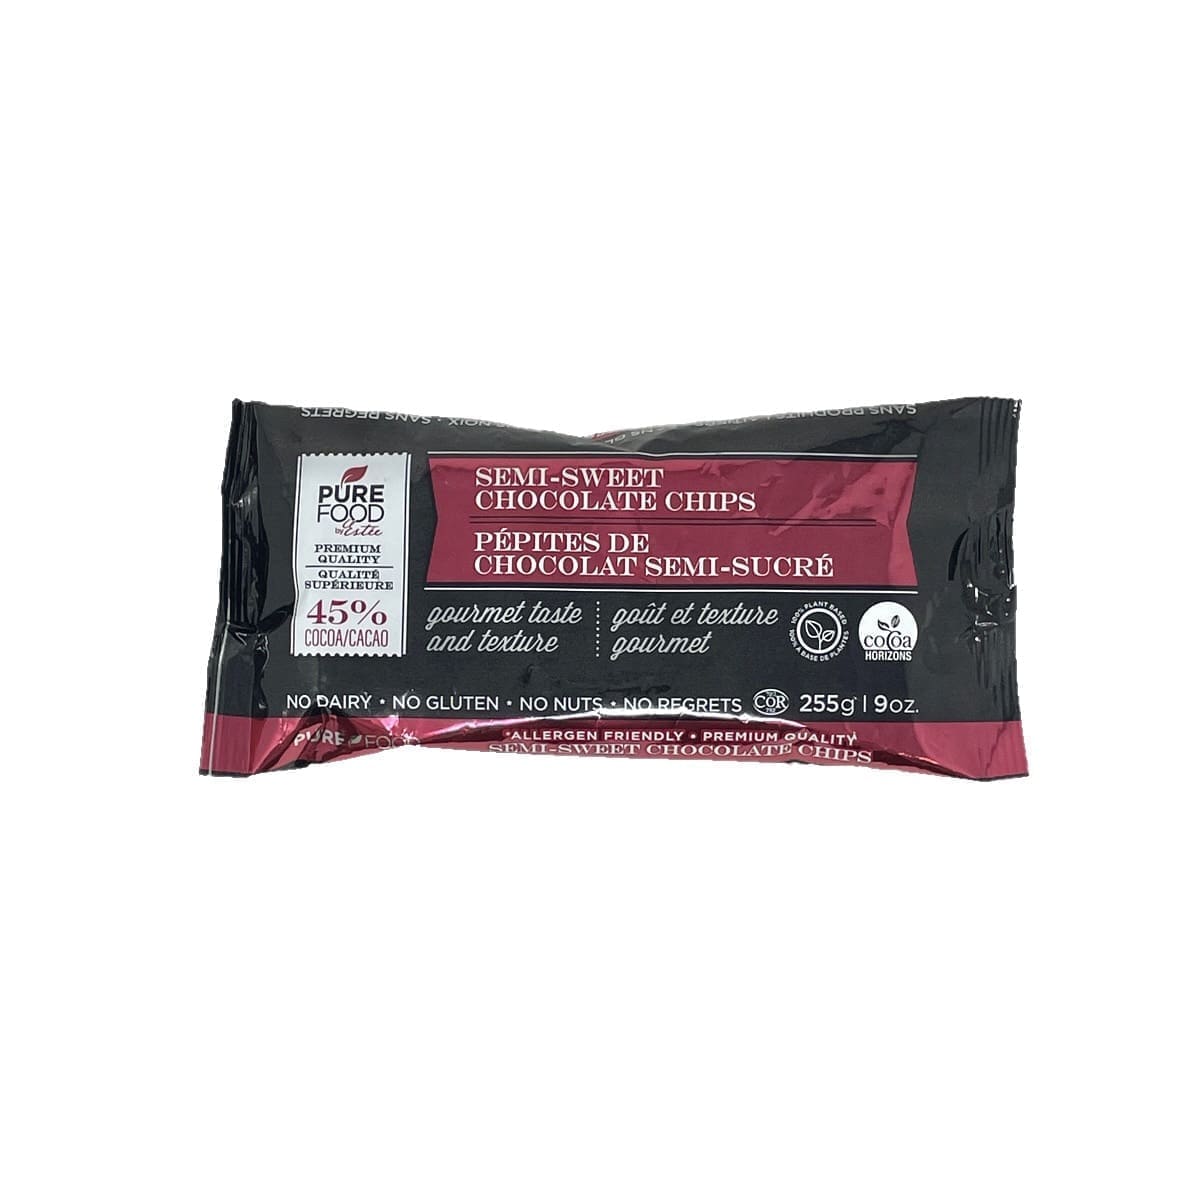 Pure Food by Estee Semi-Sweet Chocolate Chips (255g)